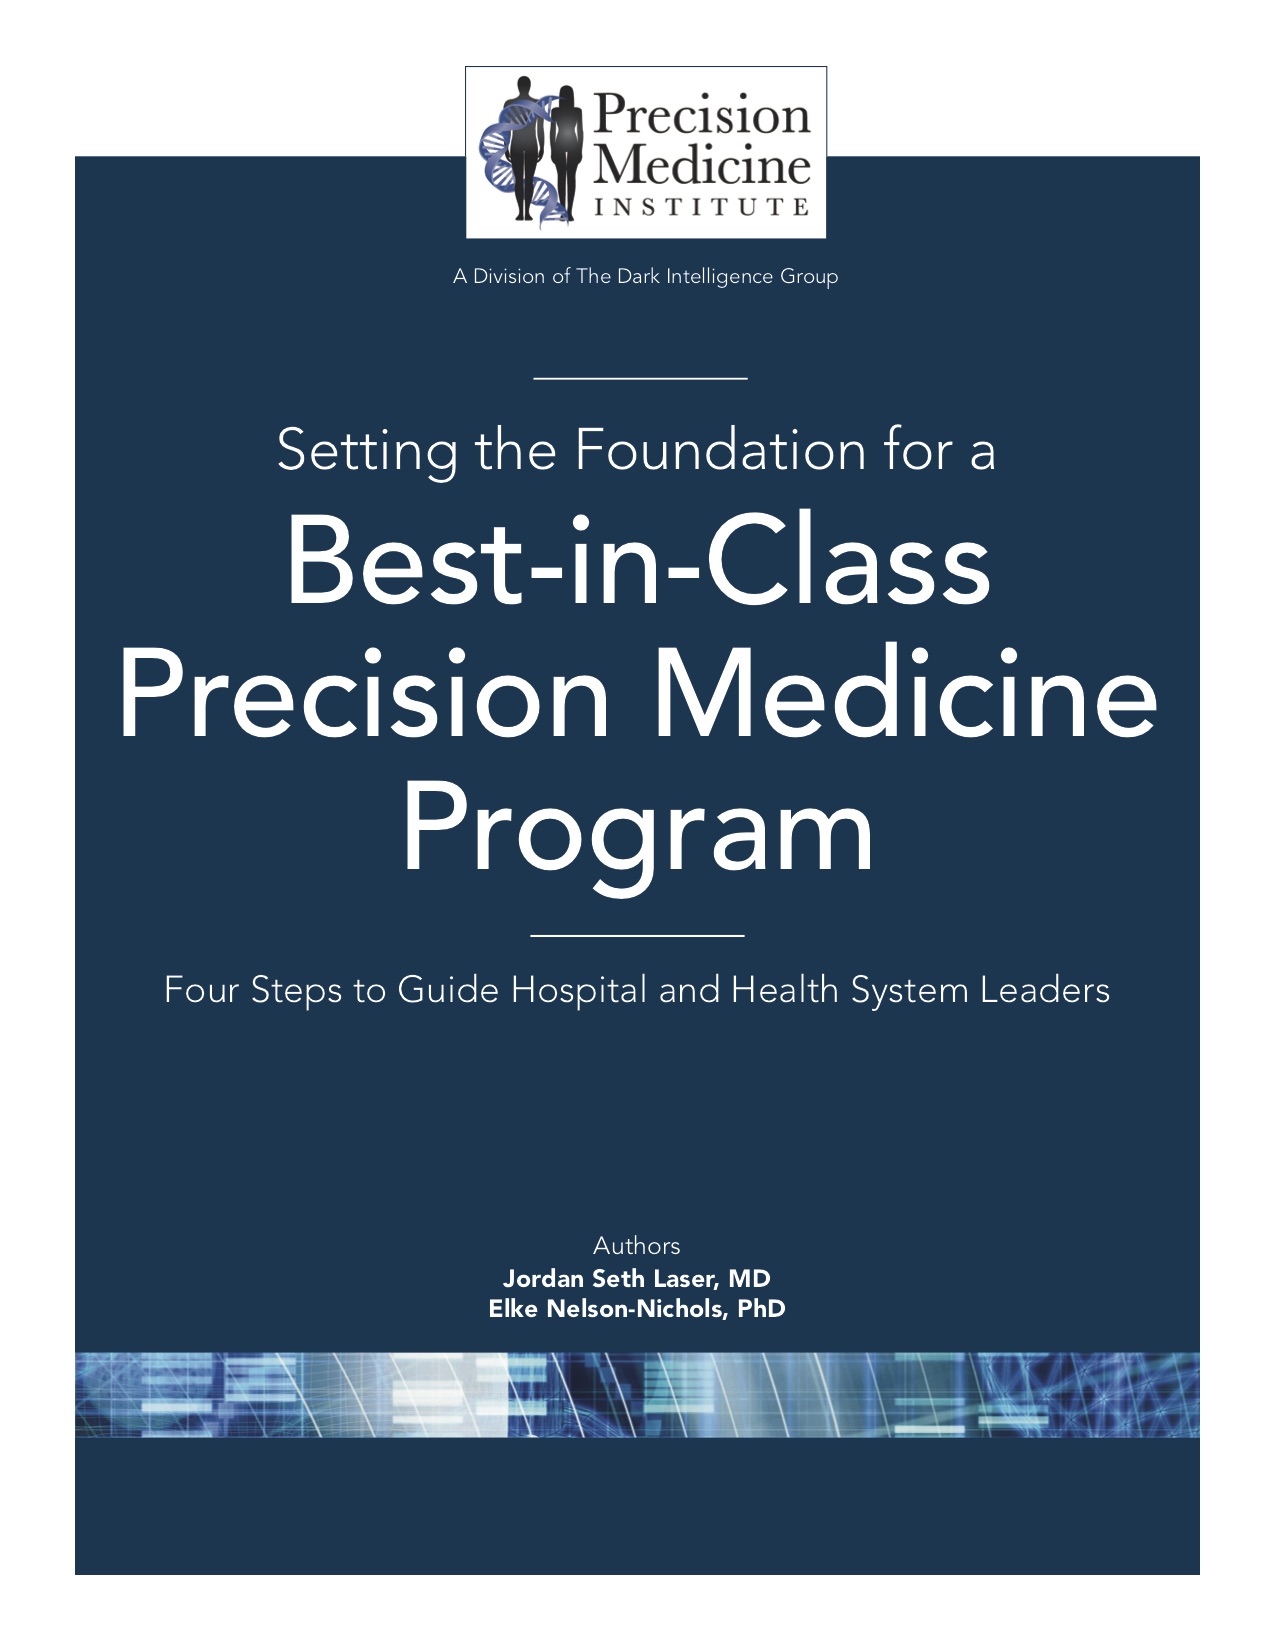 Cover image for white paper titled Setting the Foundations for Best-in-Class Precision Medicine Program